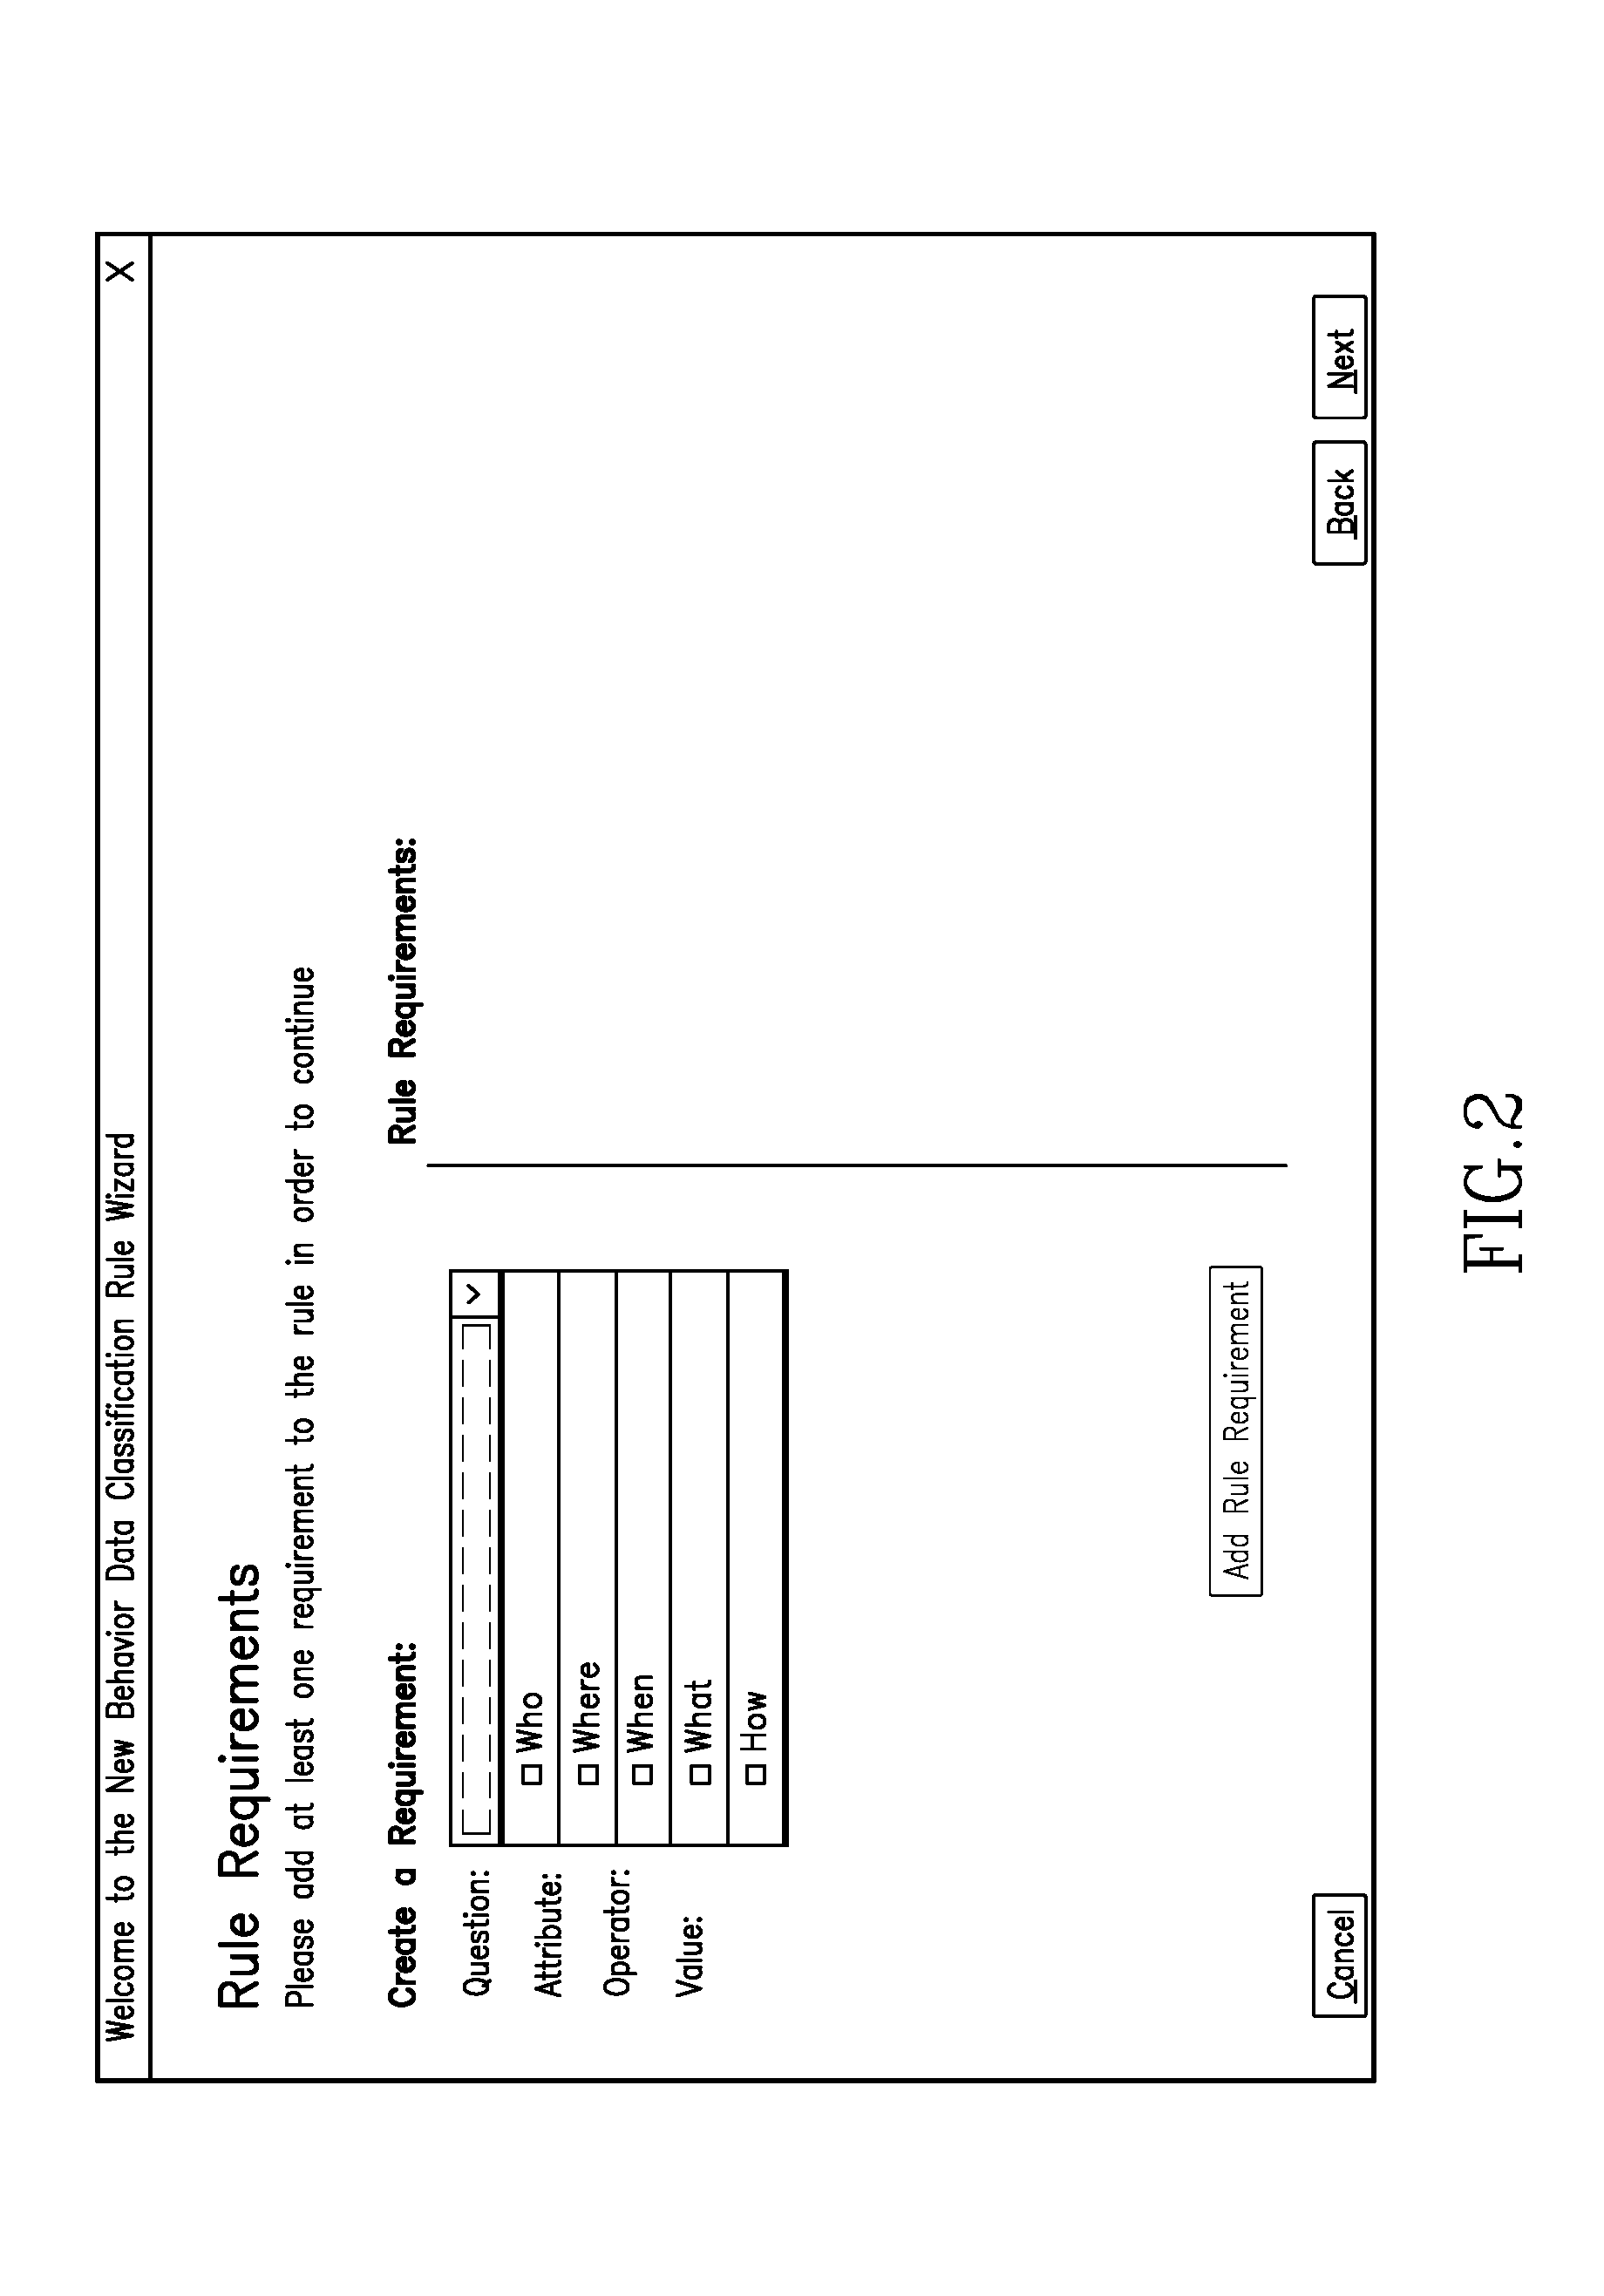 System and method for classifying documents based on access